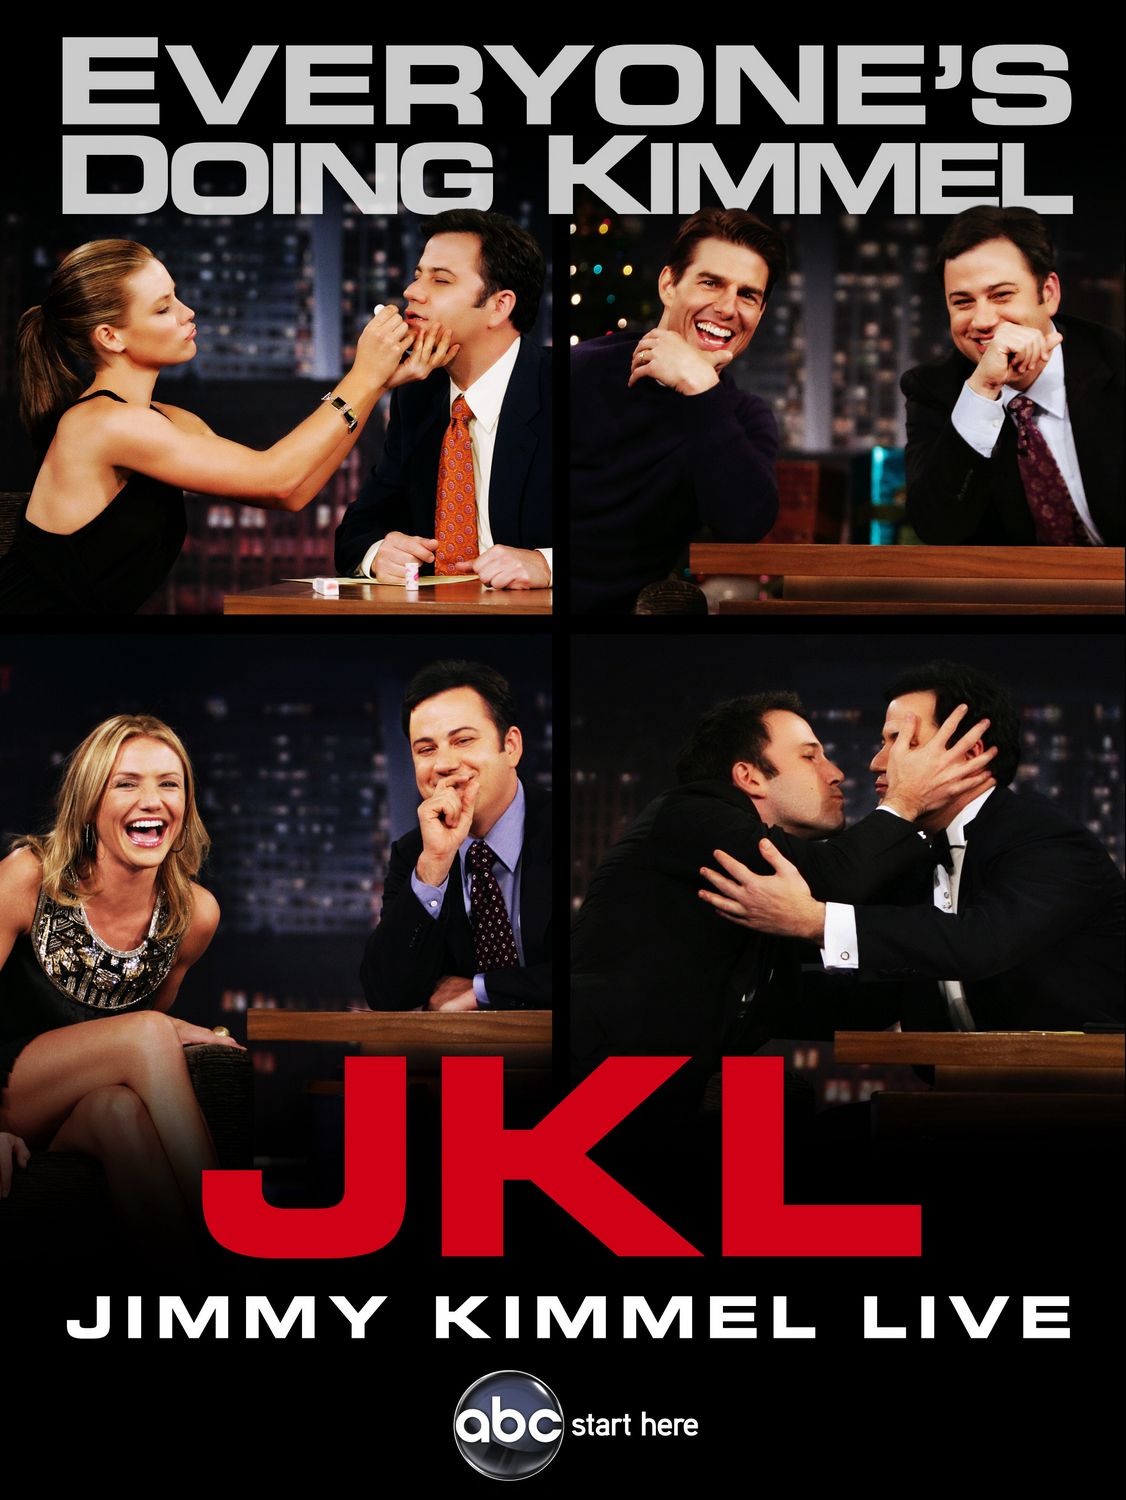 Extra Large TV Poster Image for Jimmy Kimmel Live (#2 of 4)